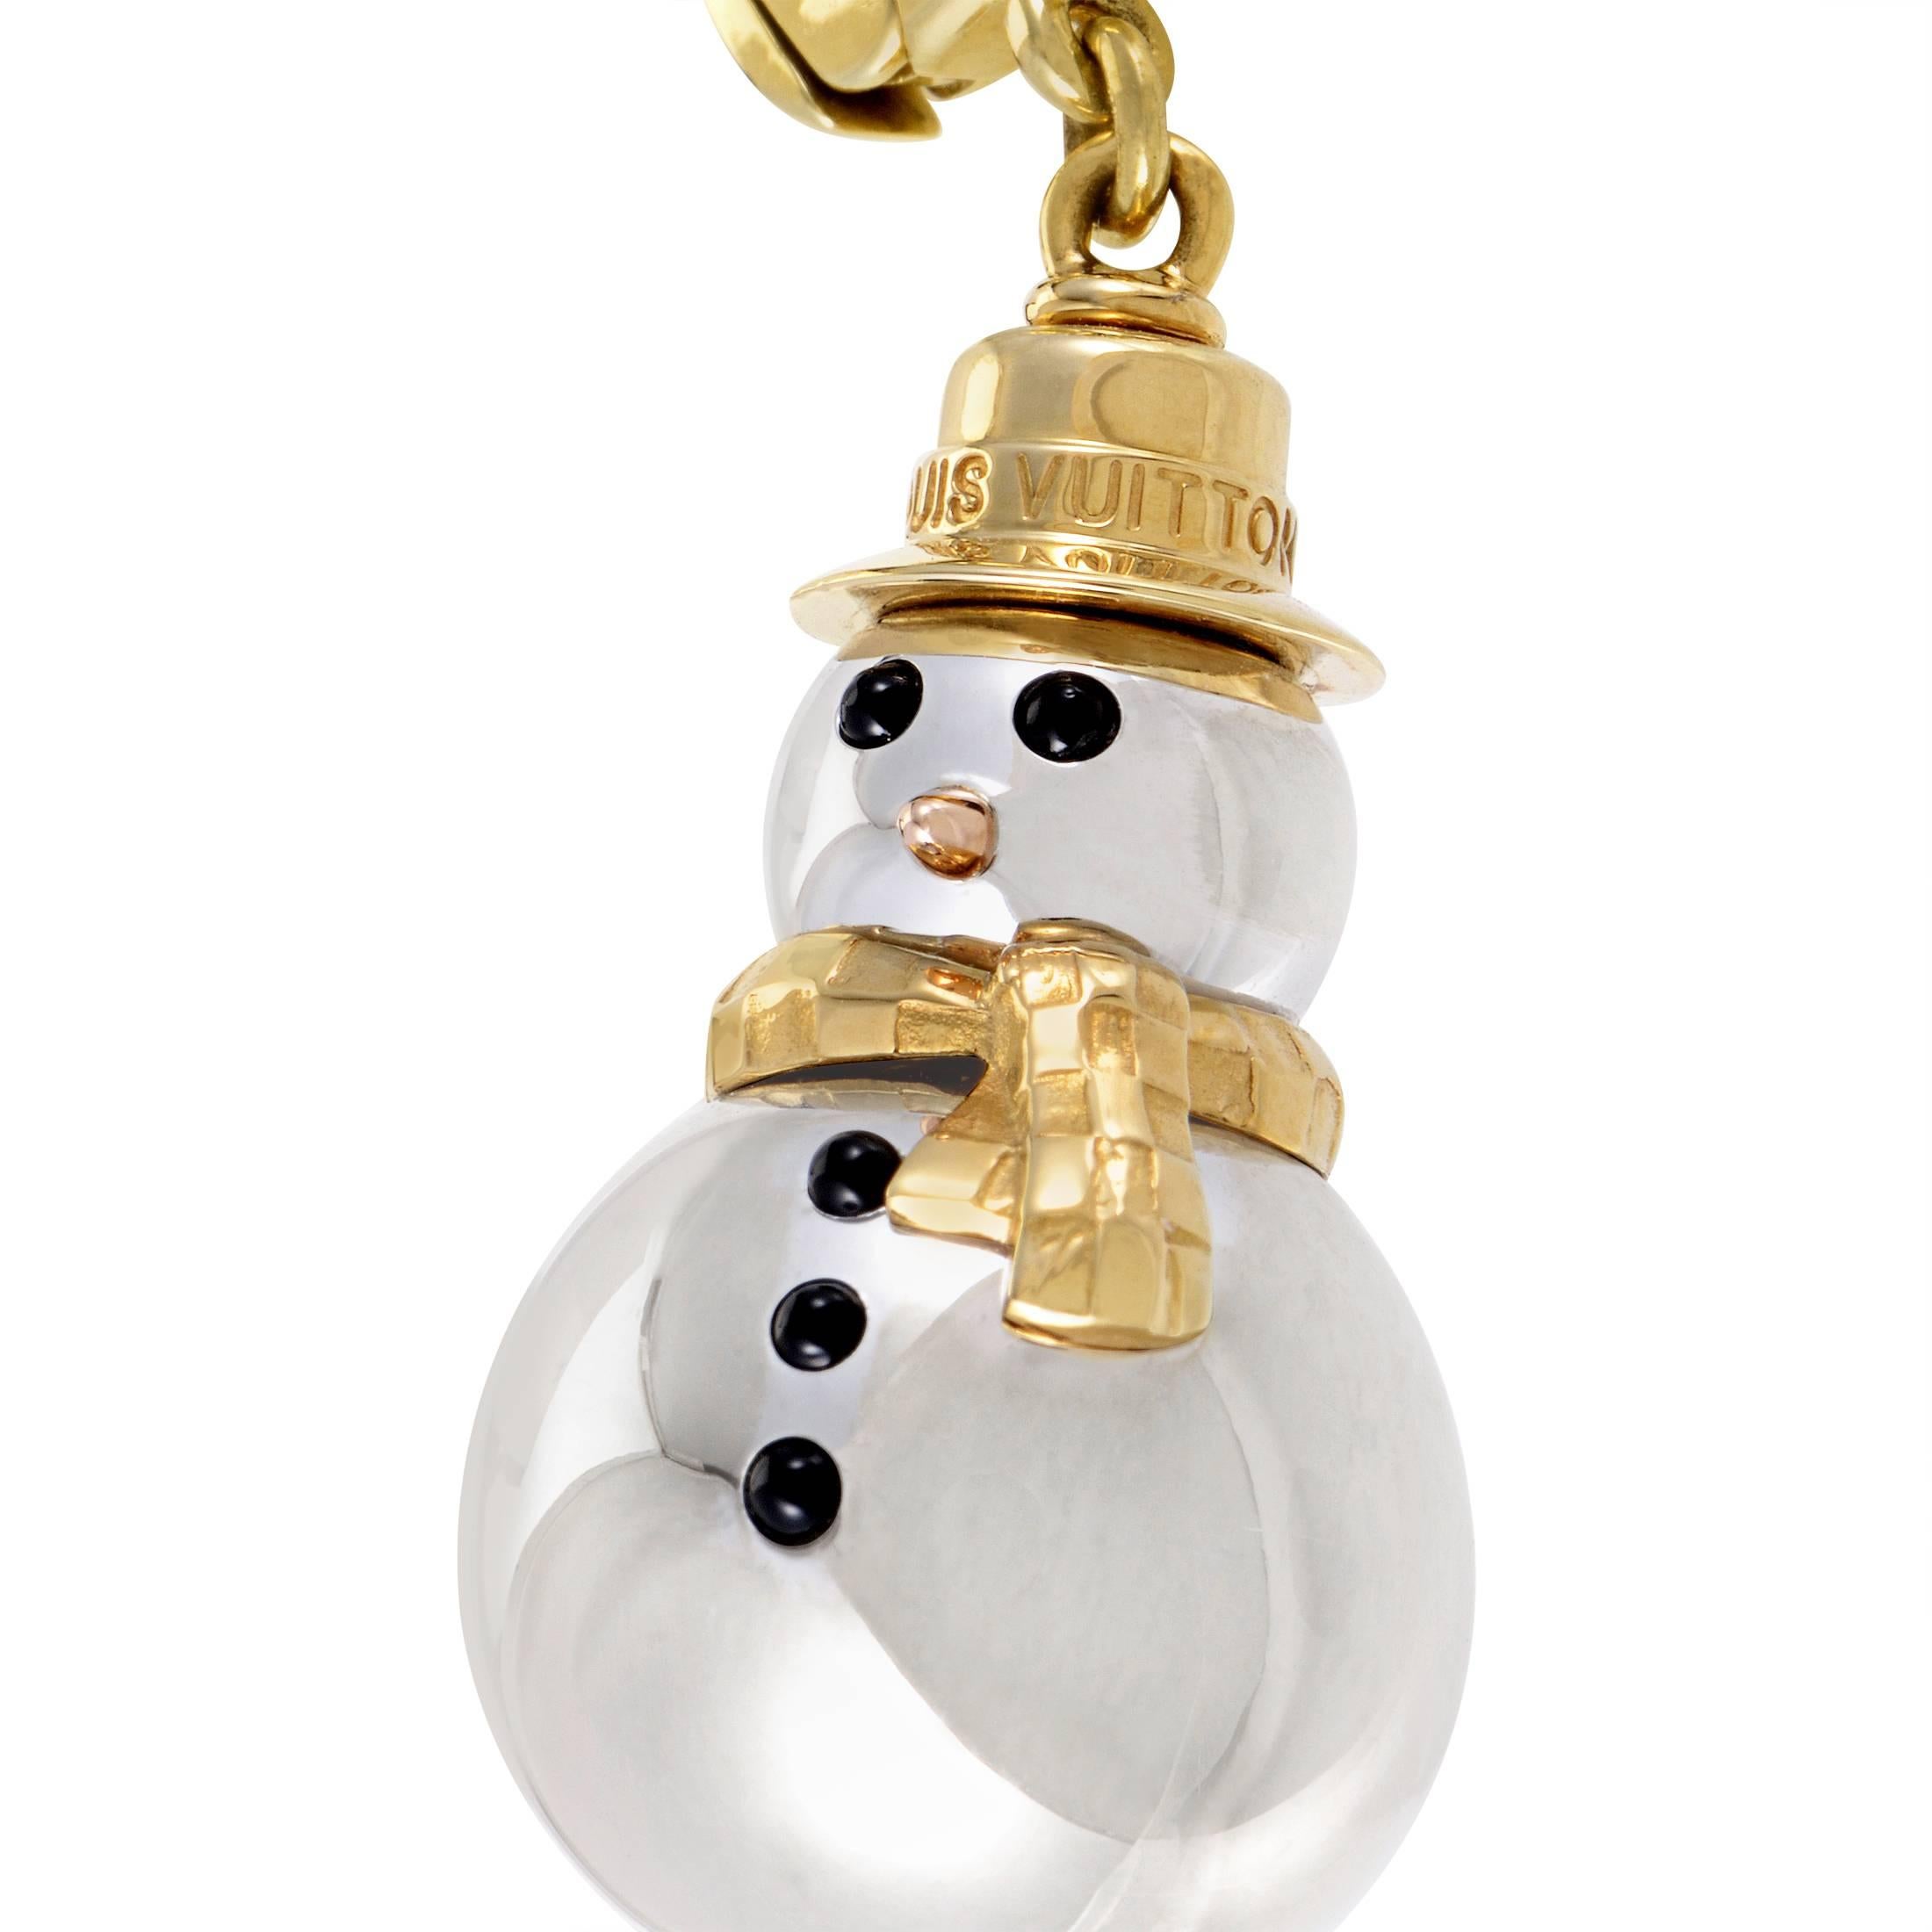 Brilliantly combining precious materials to realistically depict the compelling image of a snowman, Louis Vuitton created this fascinating pendant made of 18K white and yellow gold with stunning onyx stones perfectly completing the design.
Included